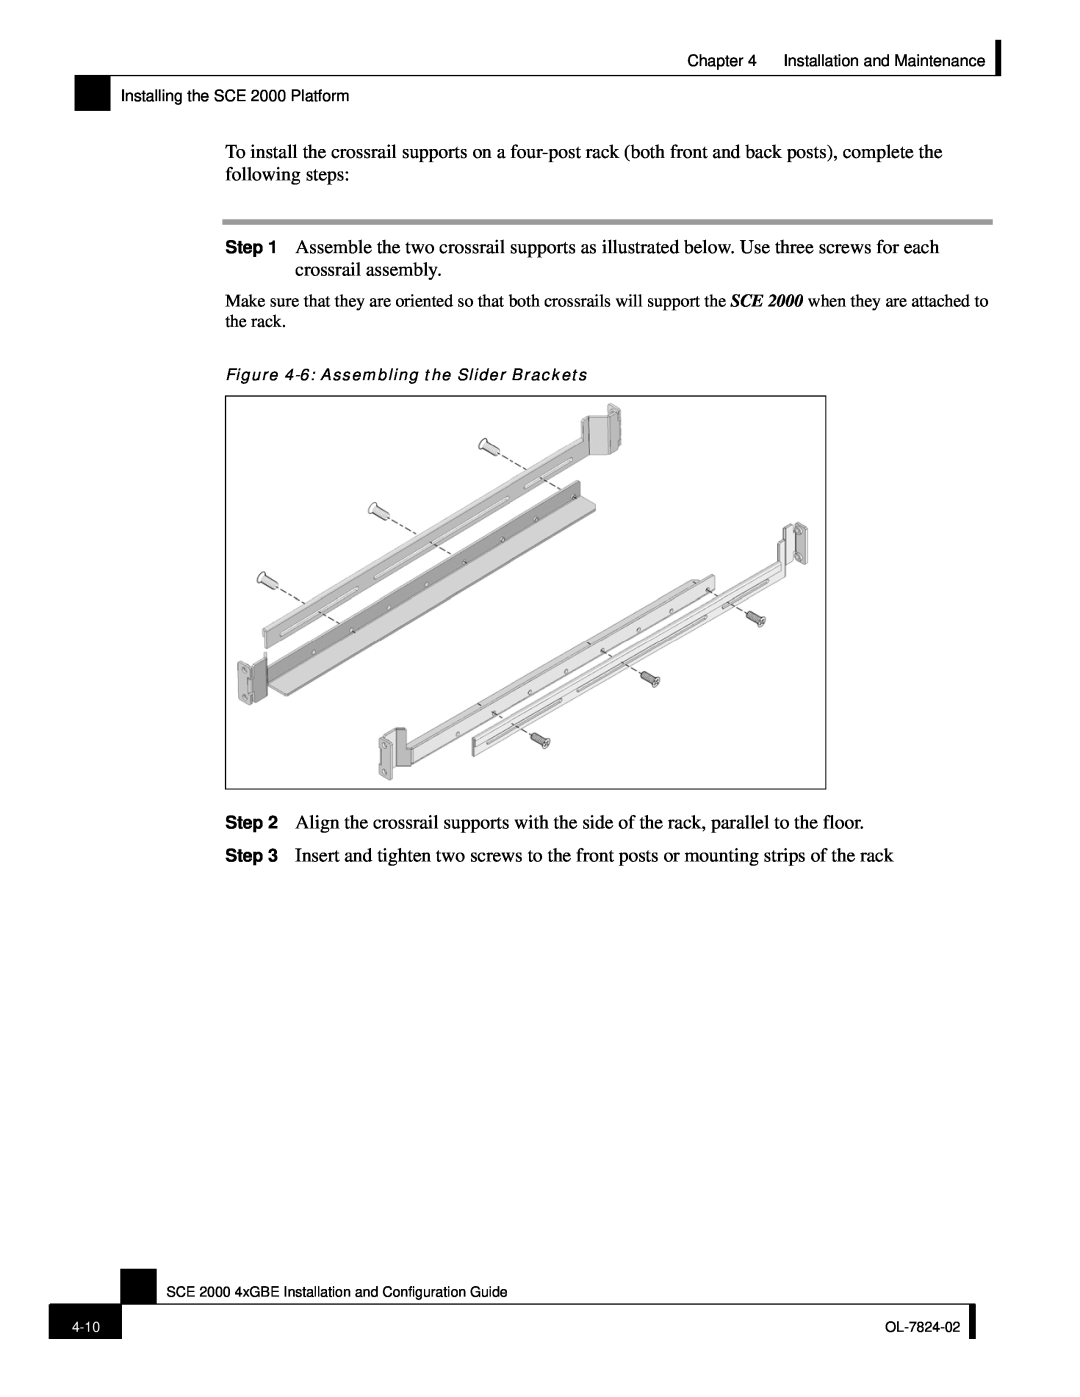 Cisco Systems SCE 2000 4xGBE manual 6 Assembling the Slider Brackets 